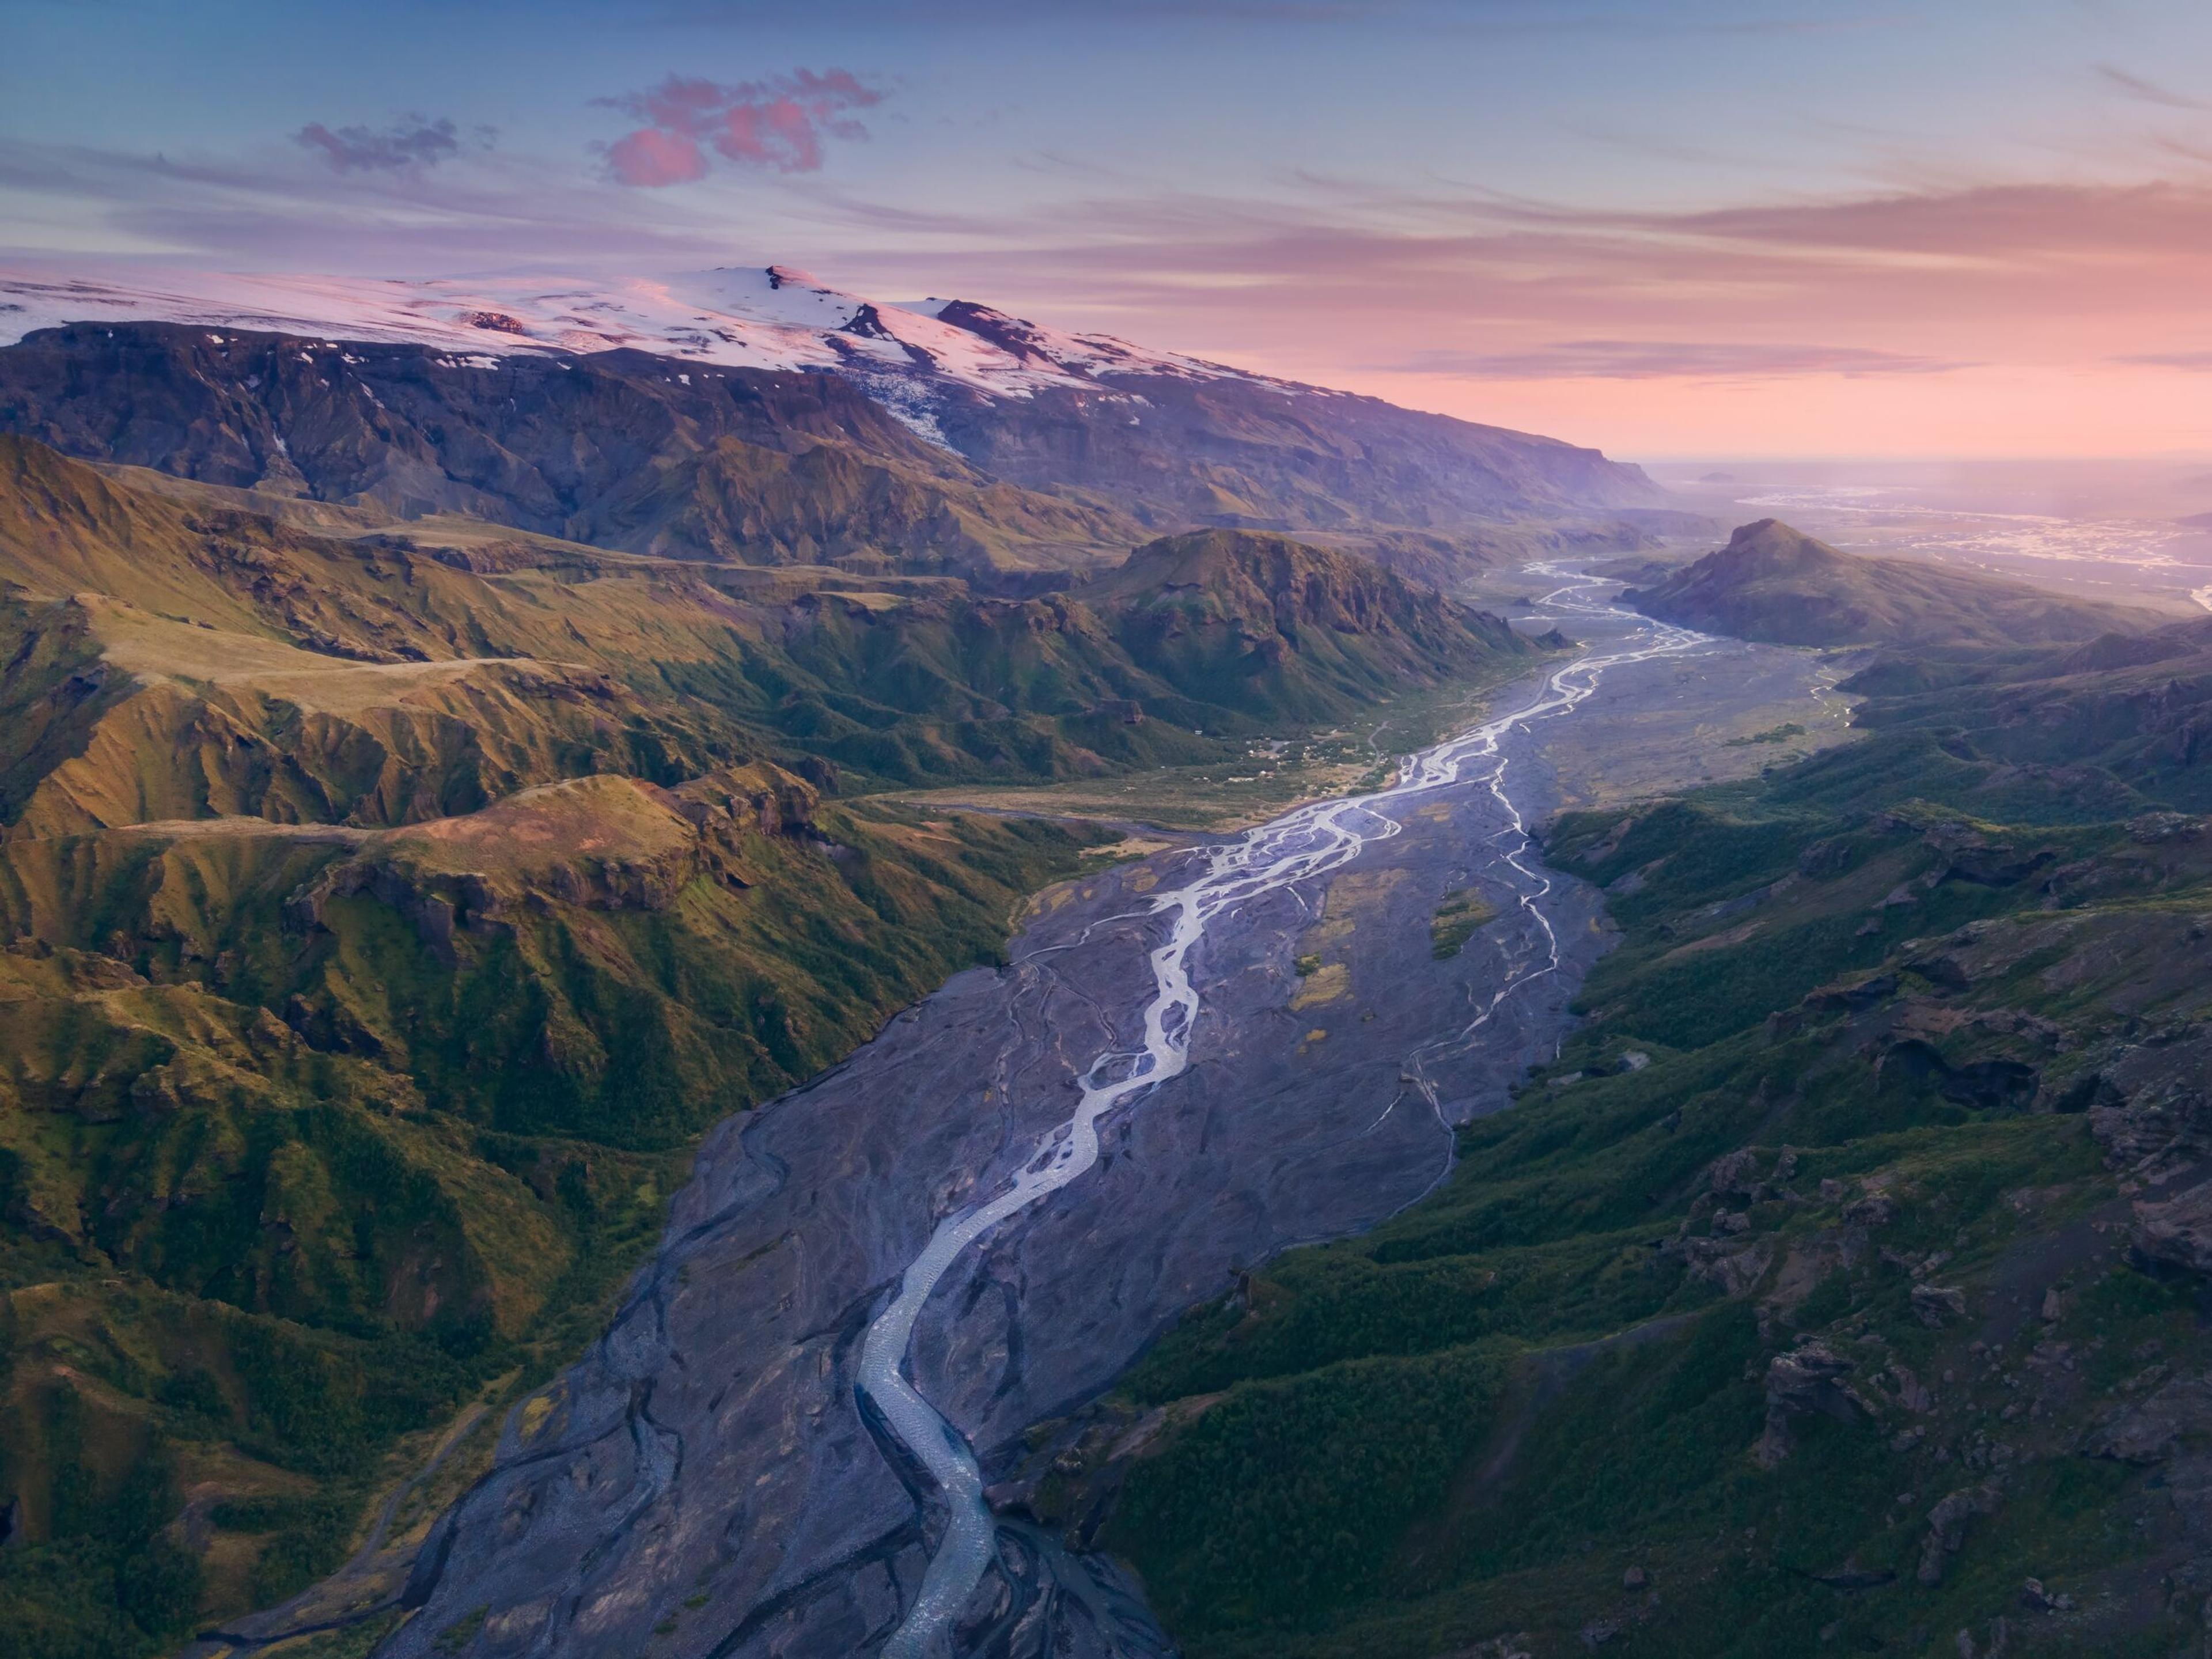 A majestic view of a meandering river flowing through a green valley with imposing glaciers and mountains under a pastel-hued sky at dusk.